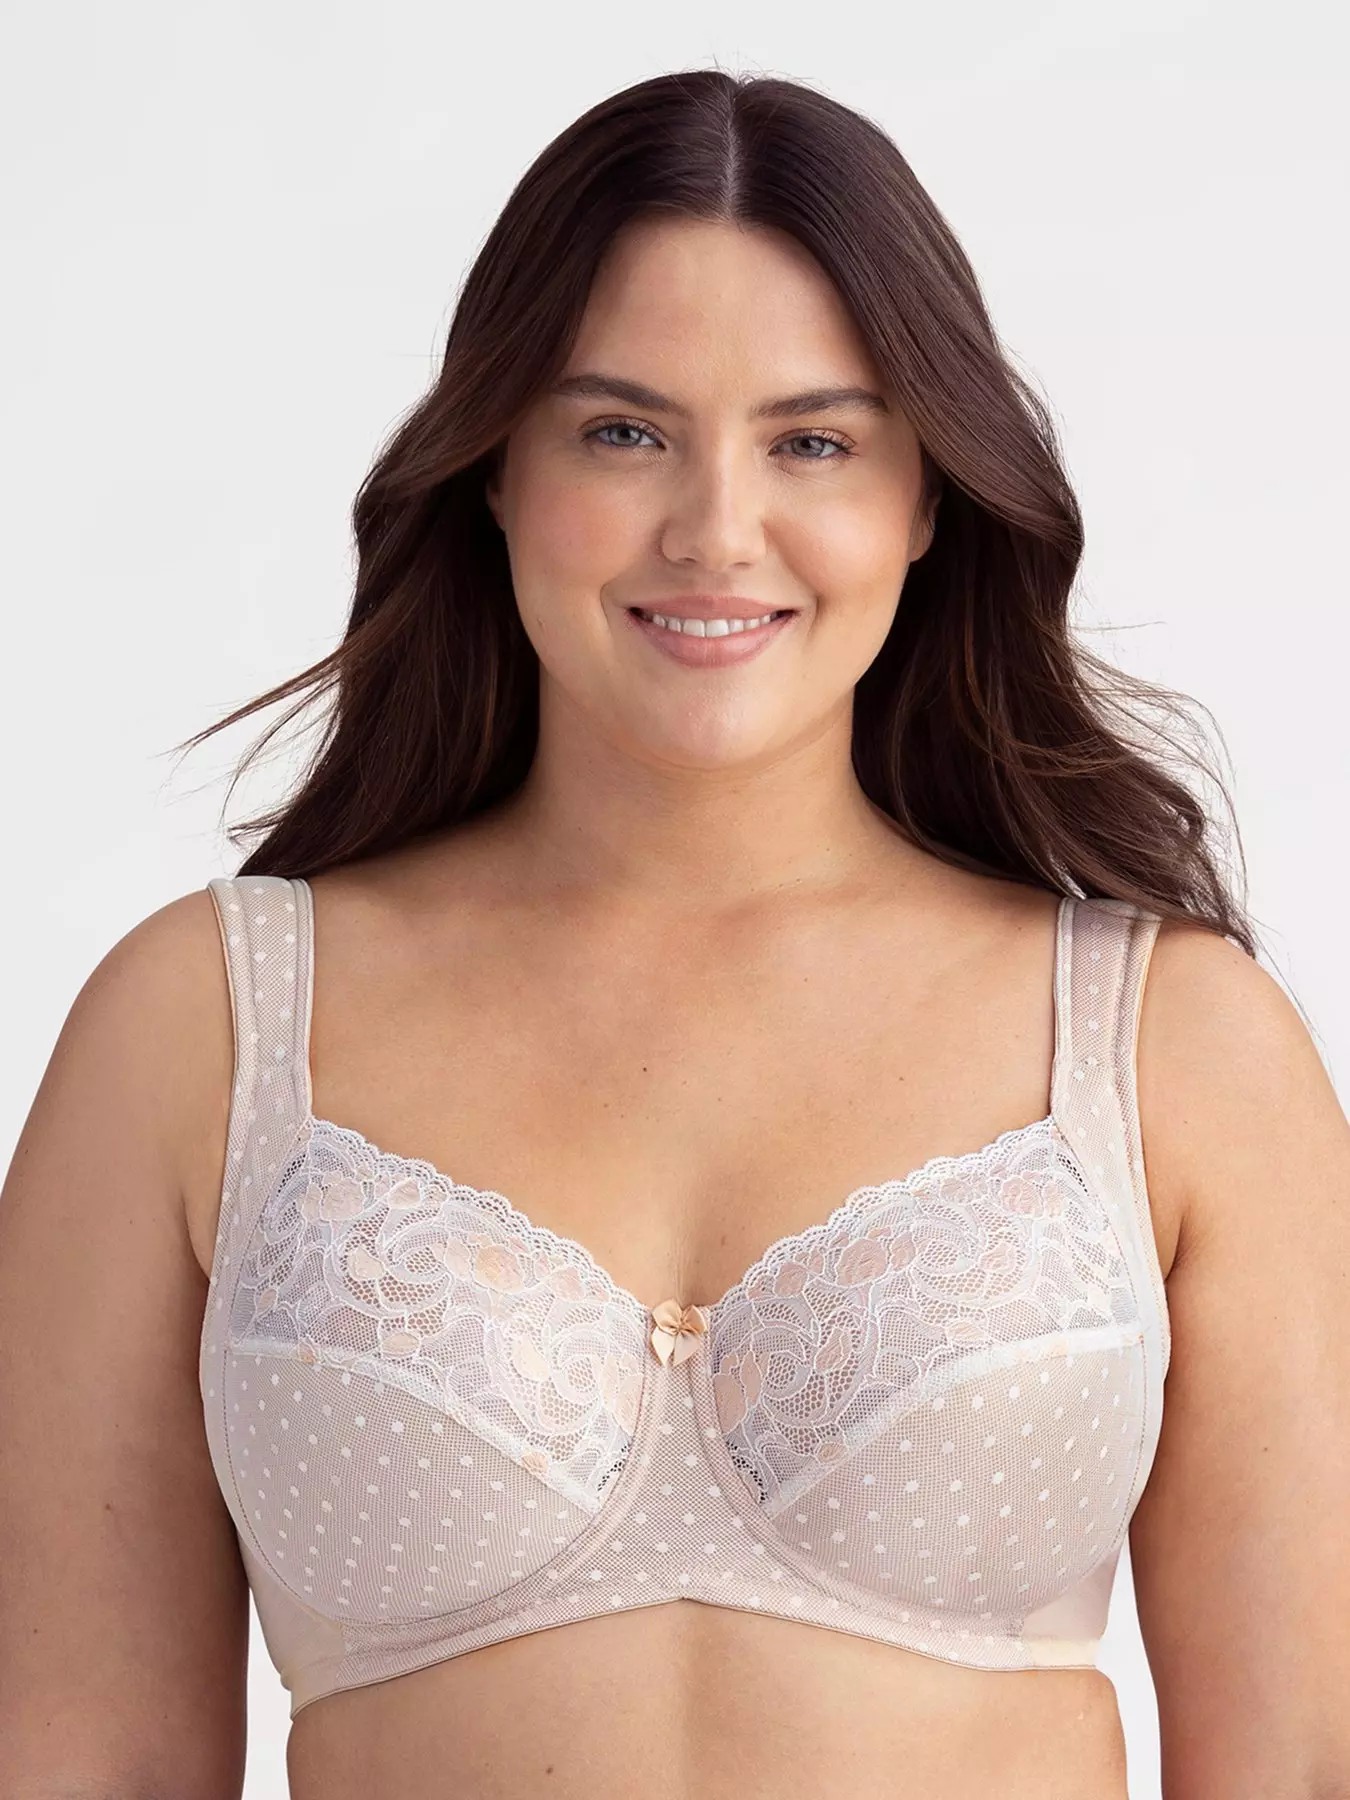  Womens Sexy Lace Bra Underwire Balconette Unlined Demi Sheer  Plus Size Bright Rose Dots 34B